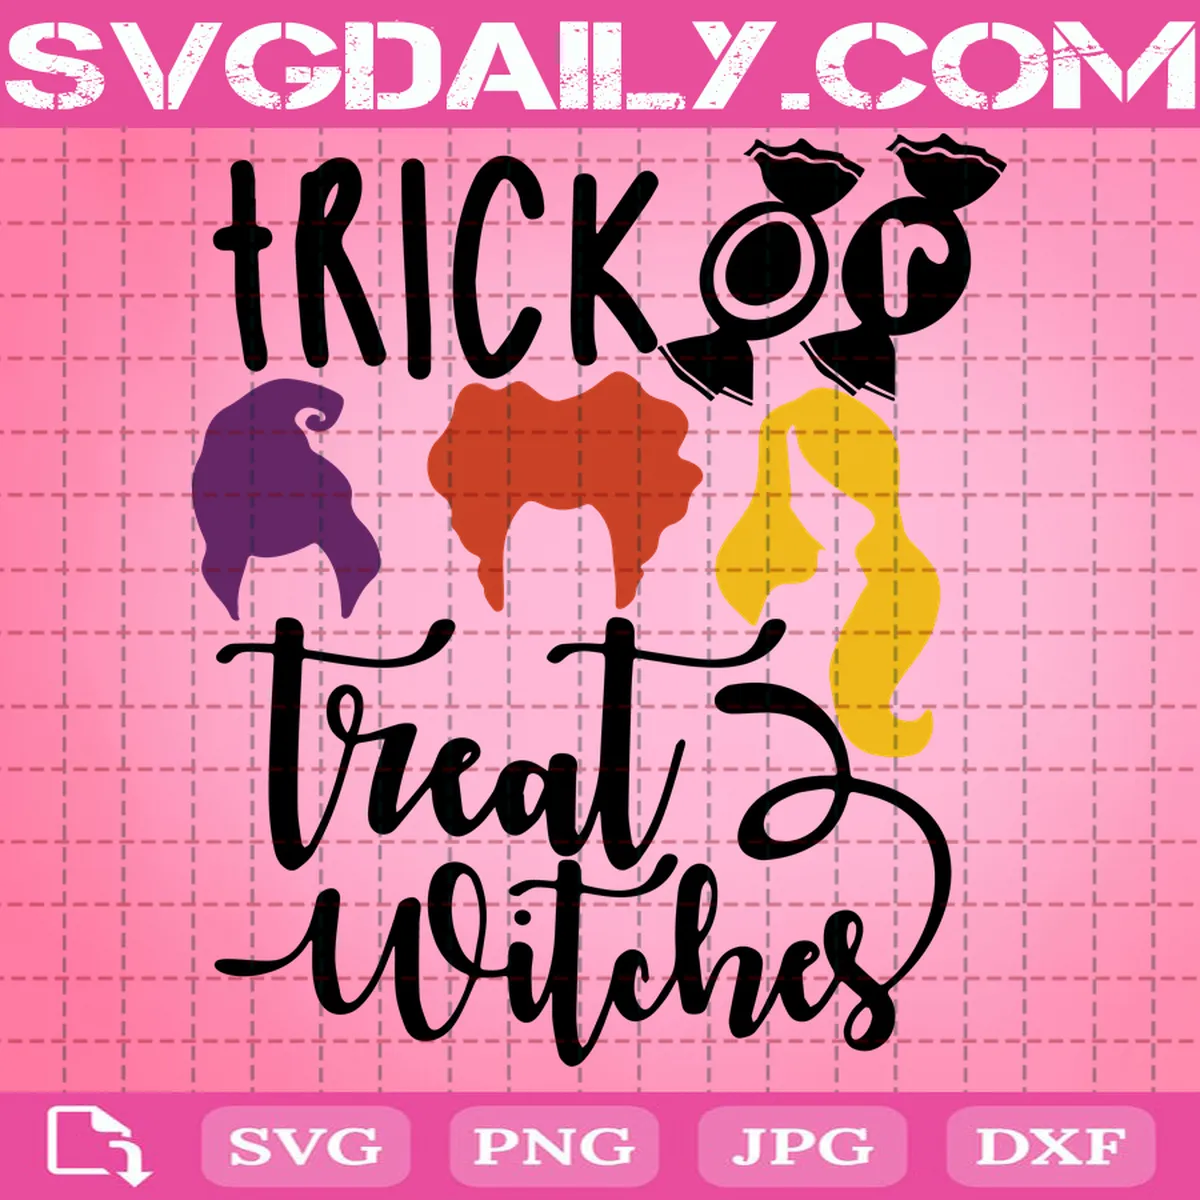 Trick Or Treat Witches Svg, Hocus Pocus Witches Svg, Witches Svg, Halloween Svg, Halloween Gift Svg